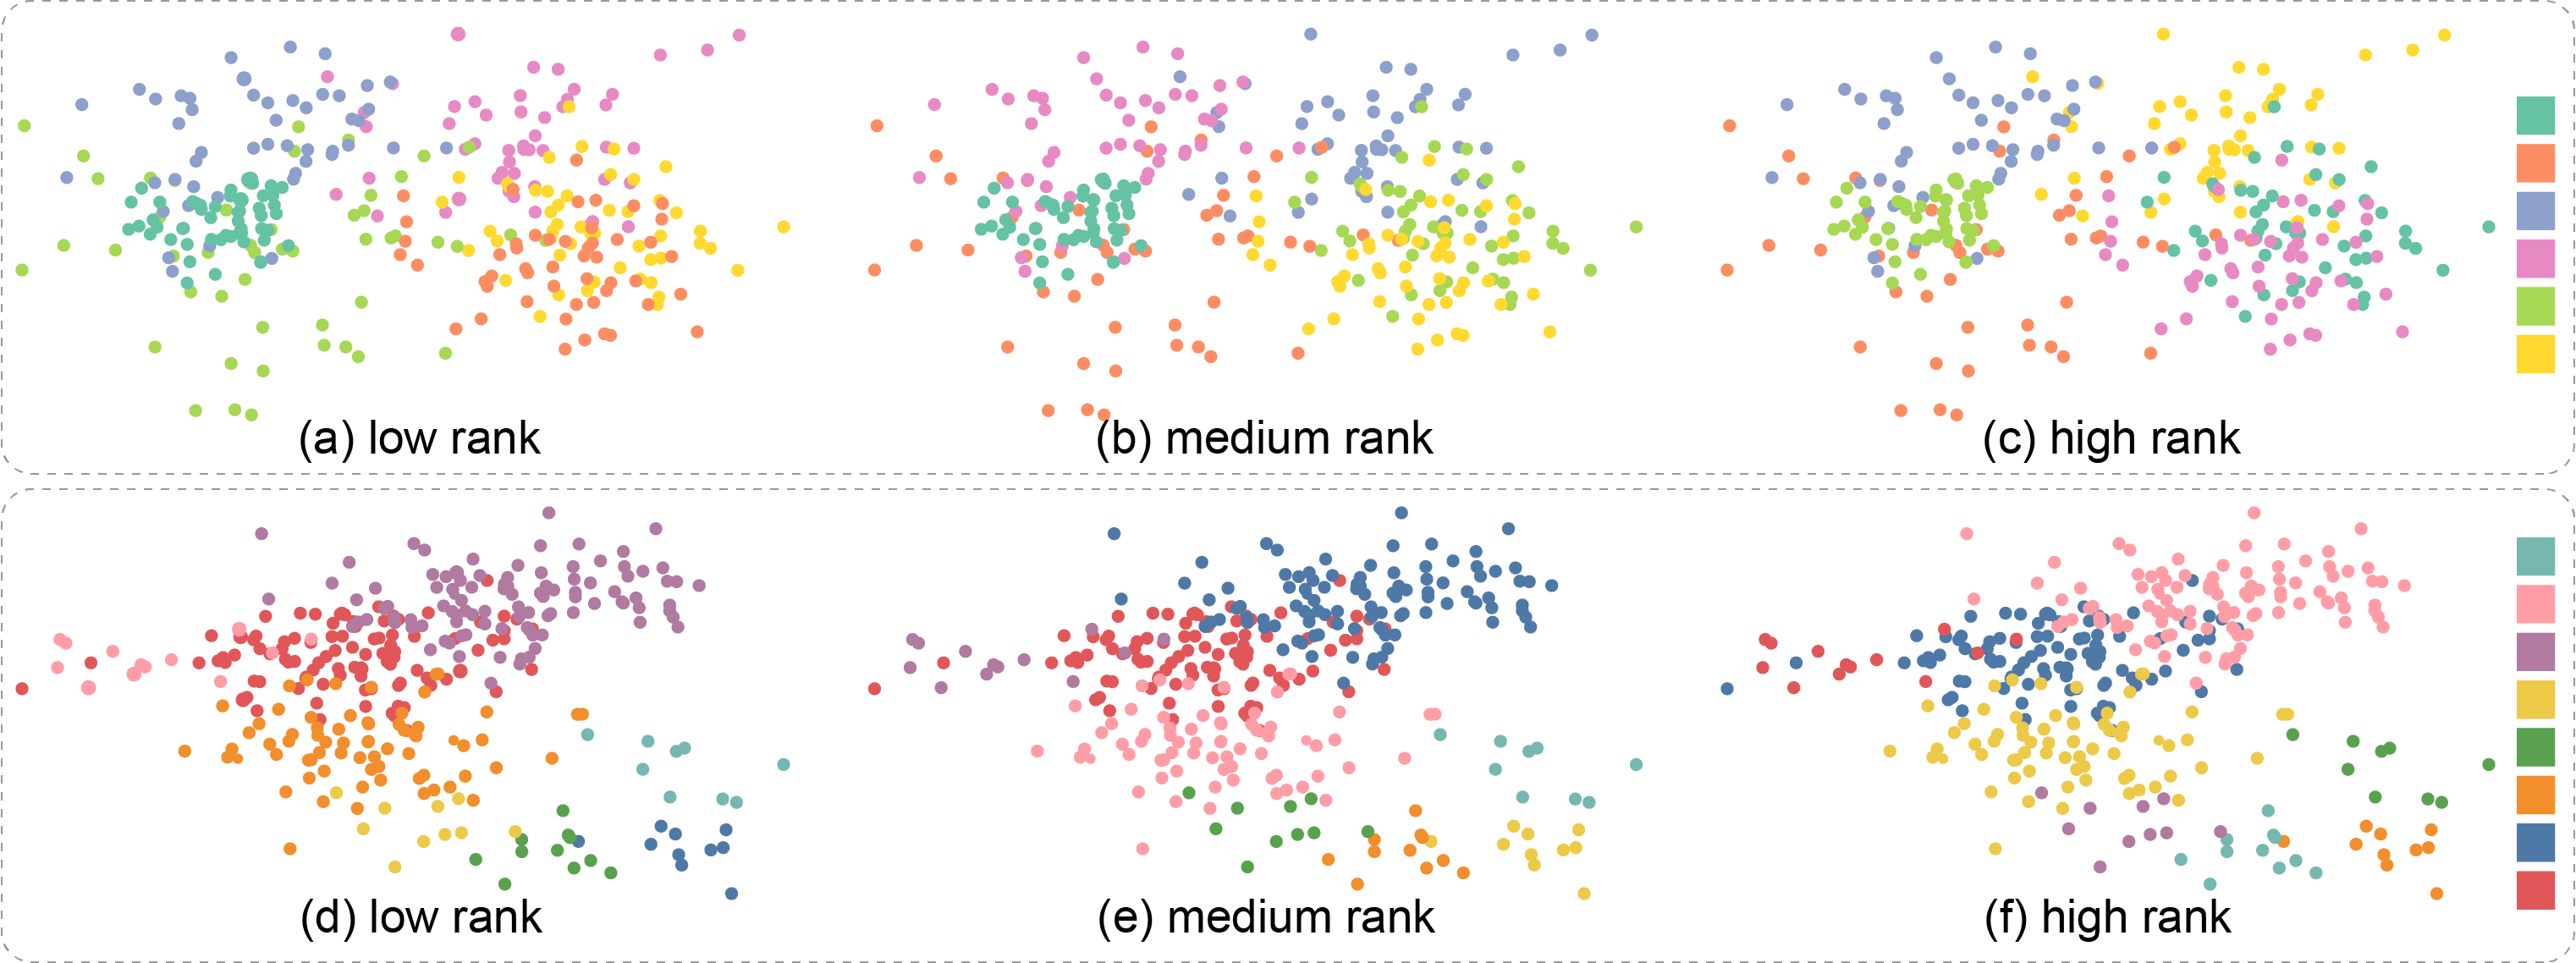 Teaser of Optimizing Color Assignment for Perception of Class Separability in Multiclass Scatterplots